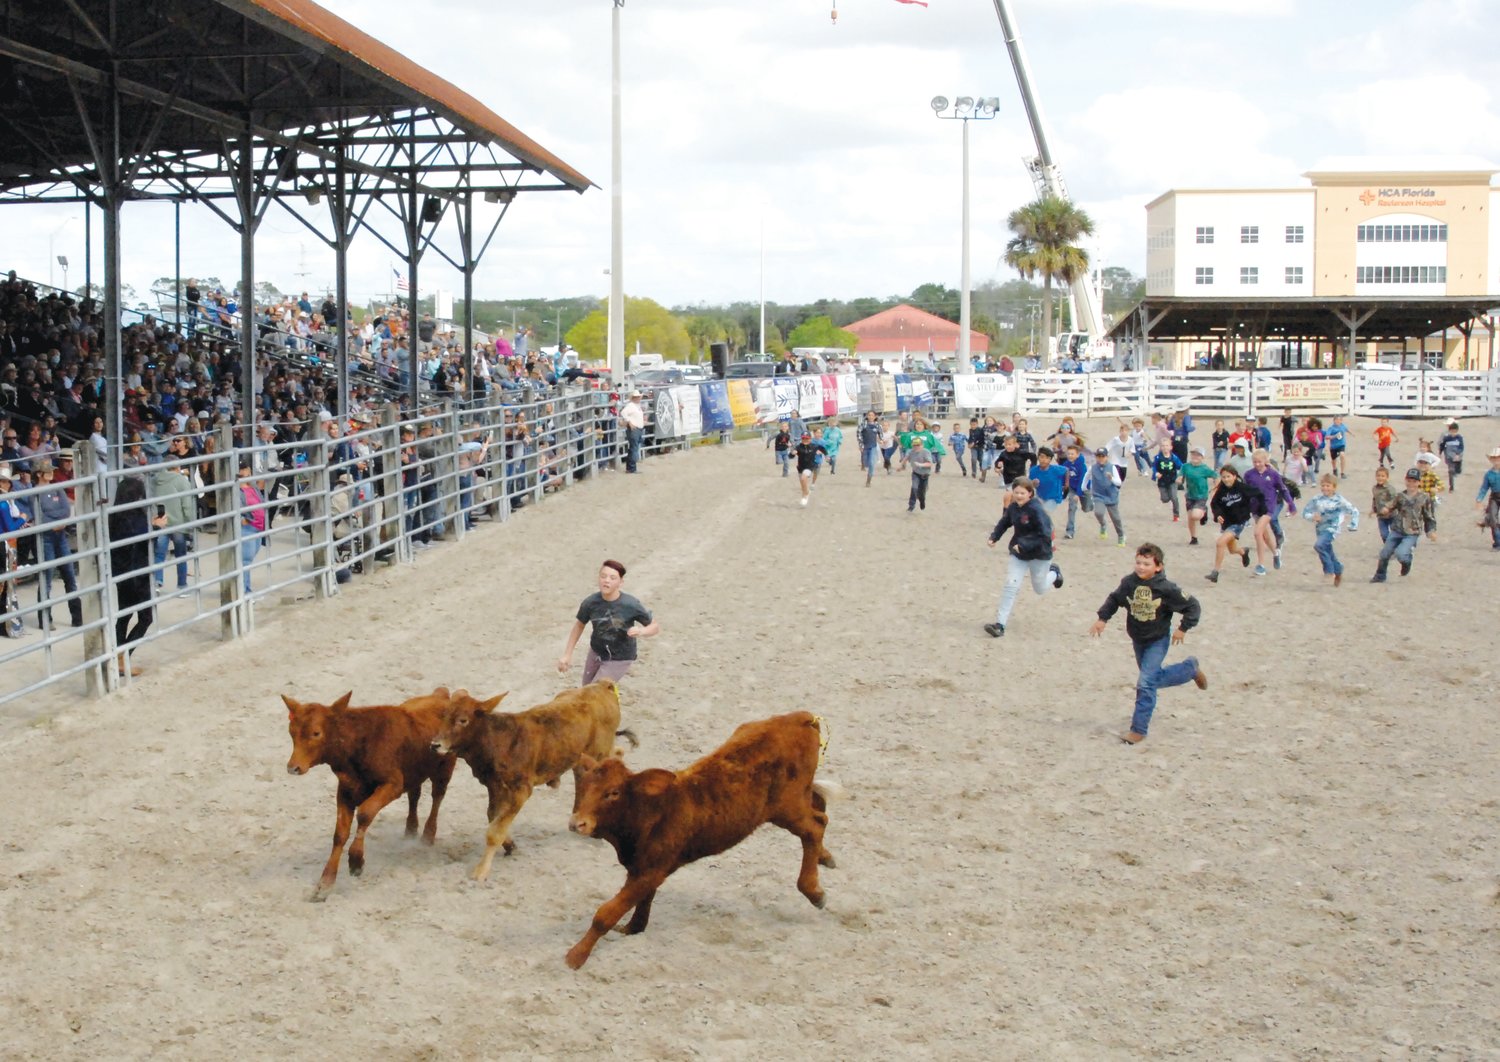 OKEECHOBEE -- For the calf scramble, children from the audience are invited into the arena. The first three to grab a ribbon from the tail of a calf win a prize.